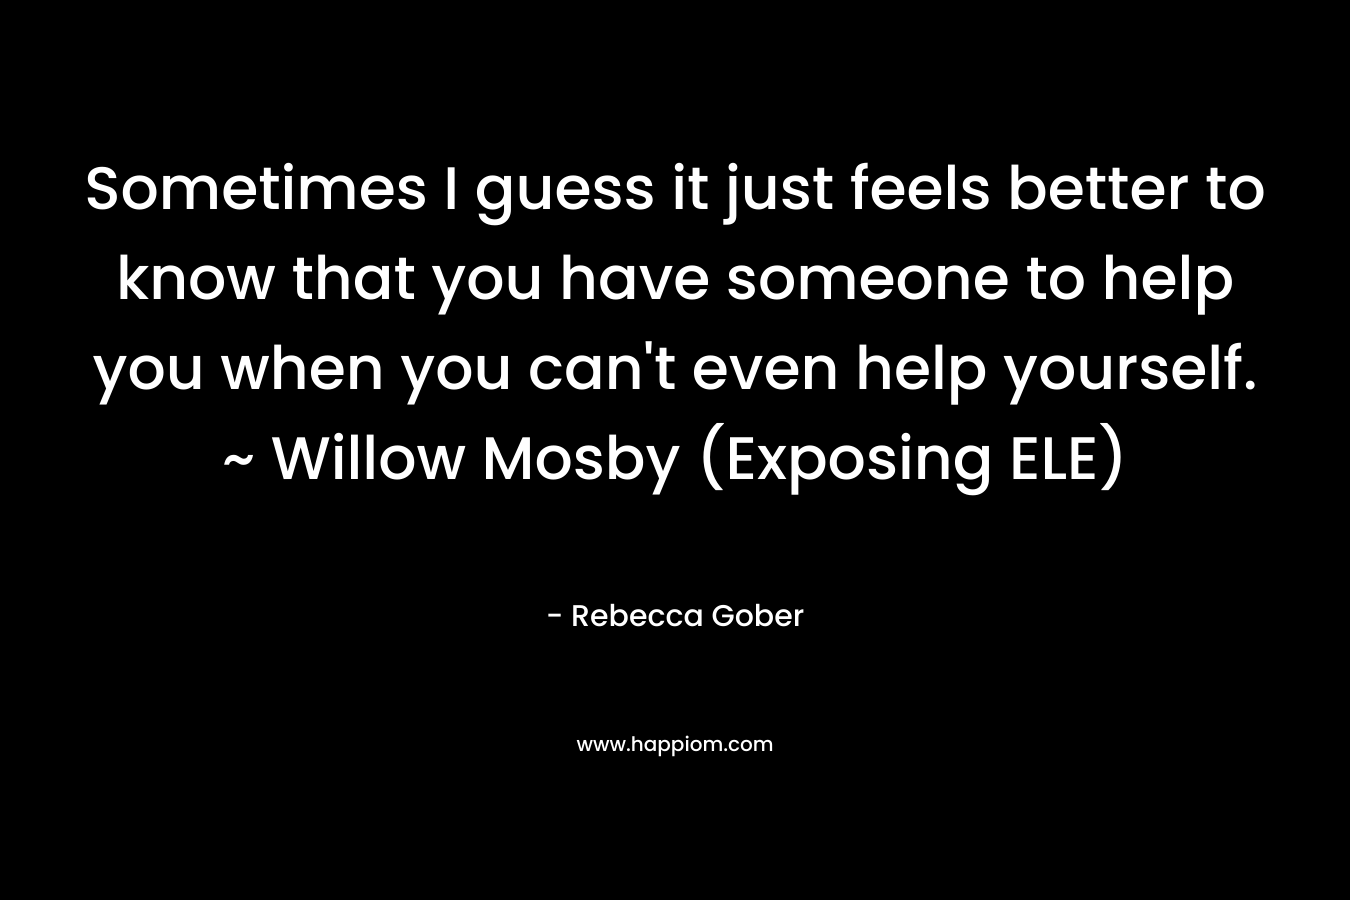 Sometimes I guess it just feels better to know that you have someone to help you when you can't even help yourself. ~ Willow Mosby (Exposing ELE)